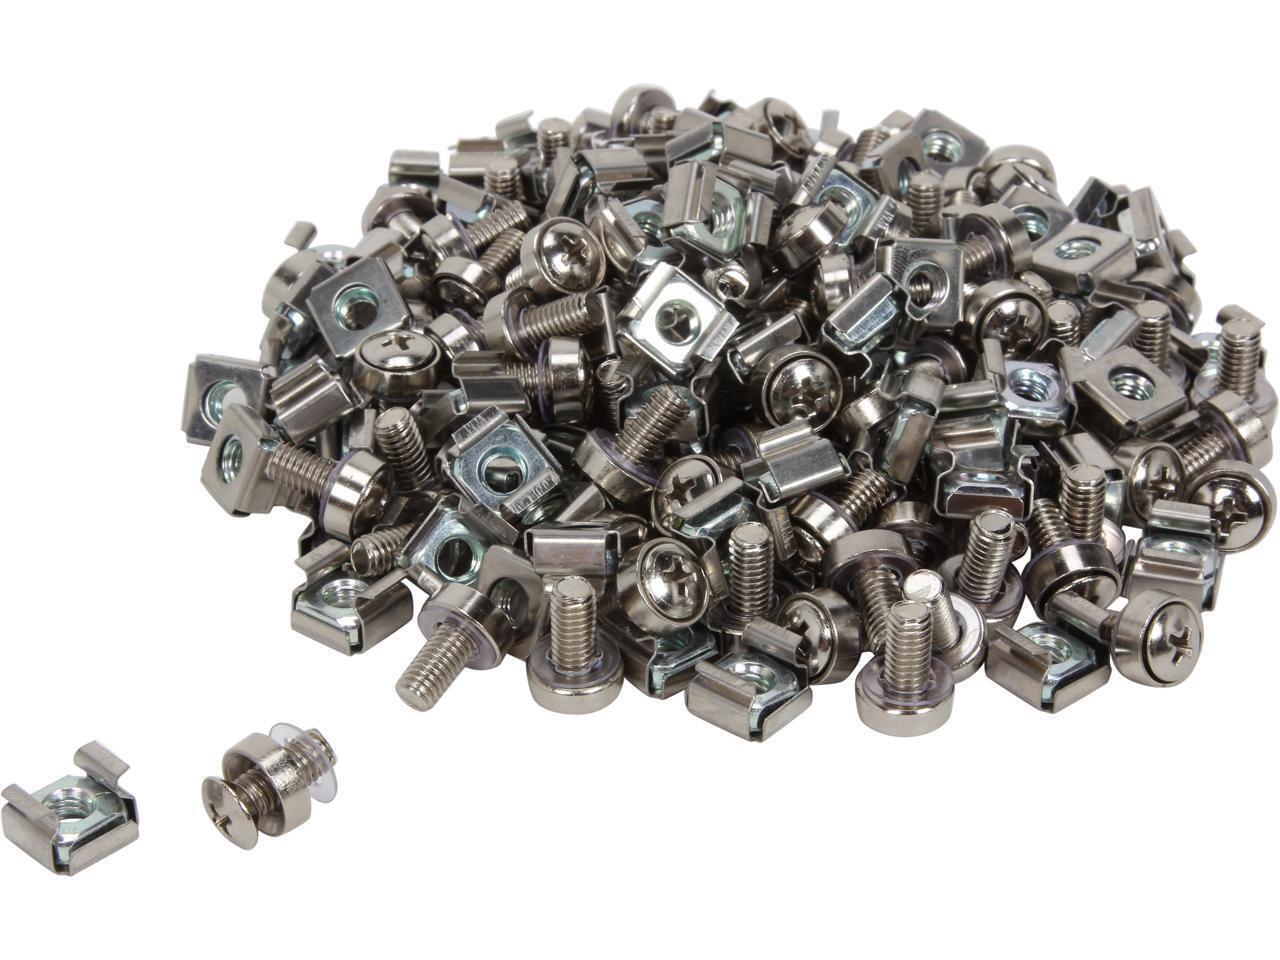 StarTech.com CABSCREWM62 100 Pkg M6 Mounting Screws and Cage Nuts for Server Rac